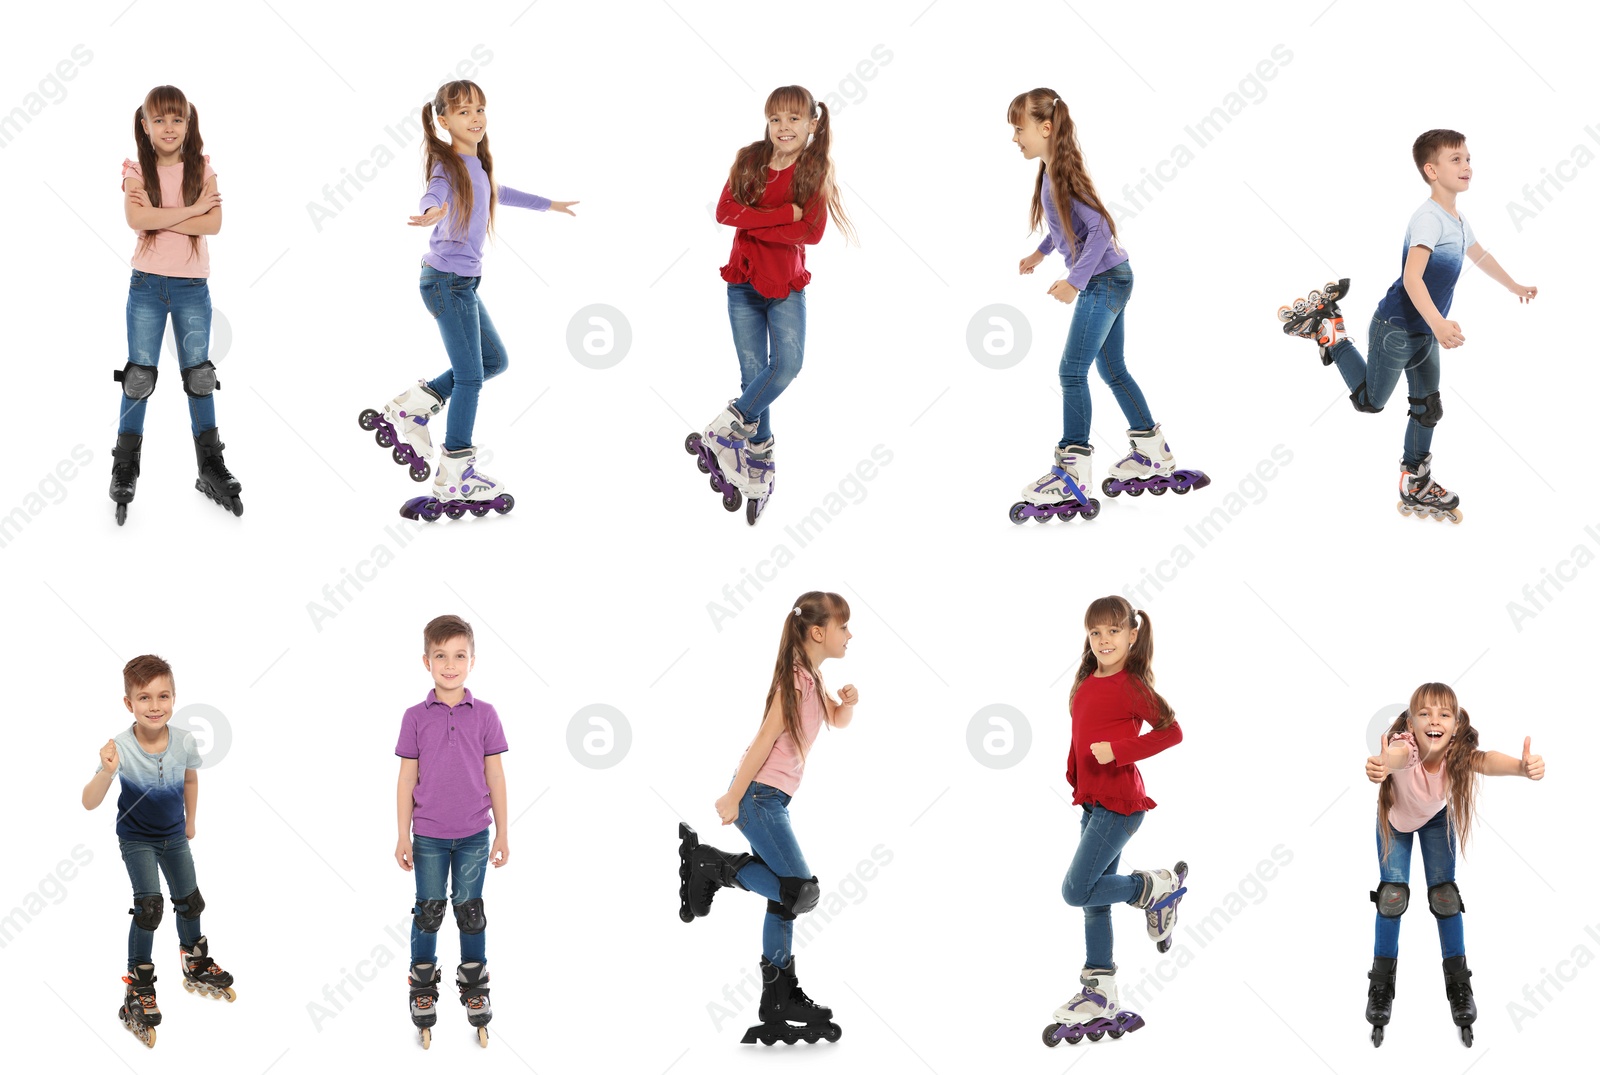 Image of Photos of boy and girl with roller skates on white background, collage design